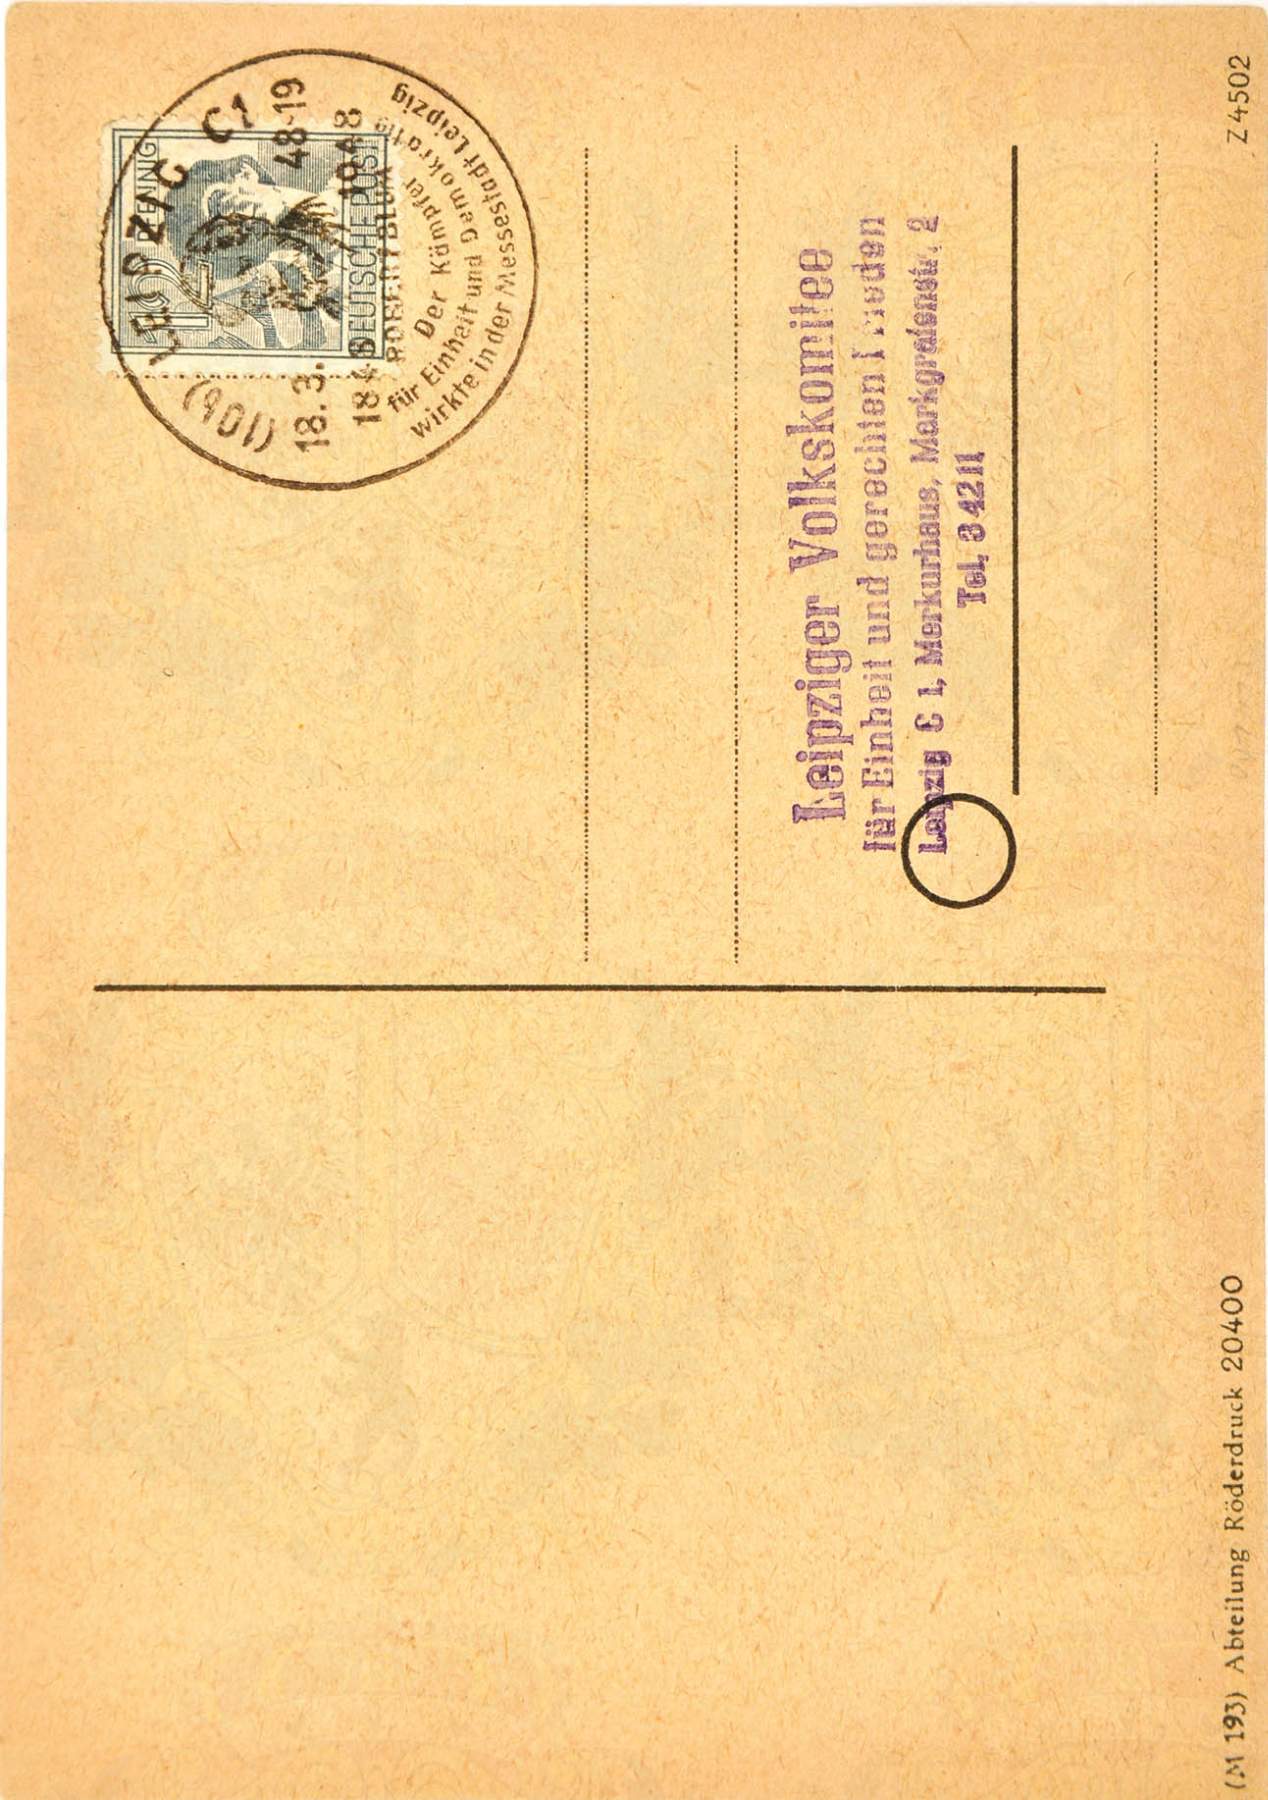 Reserve price: EUR 30 - Image 2 of 2